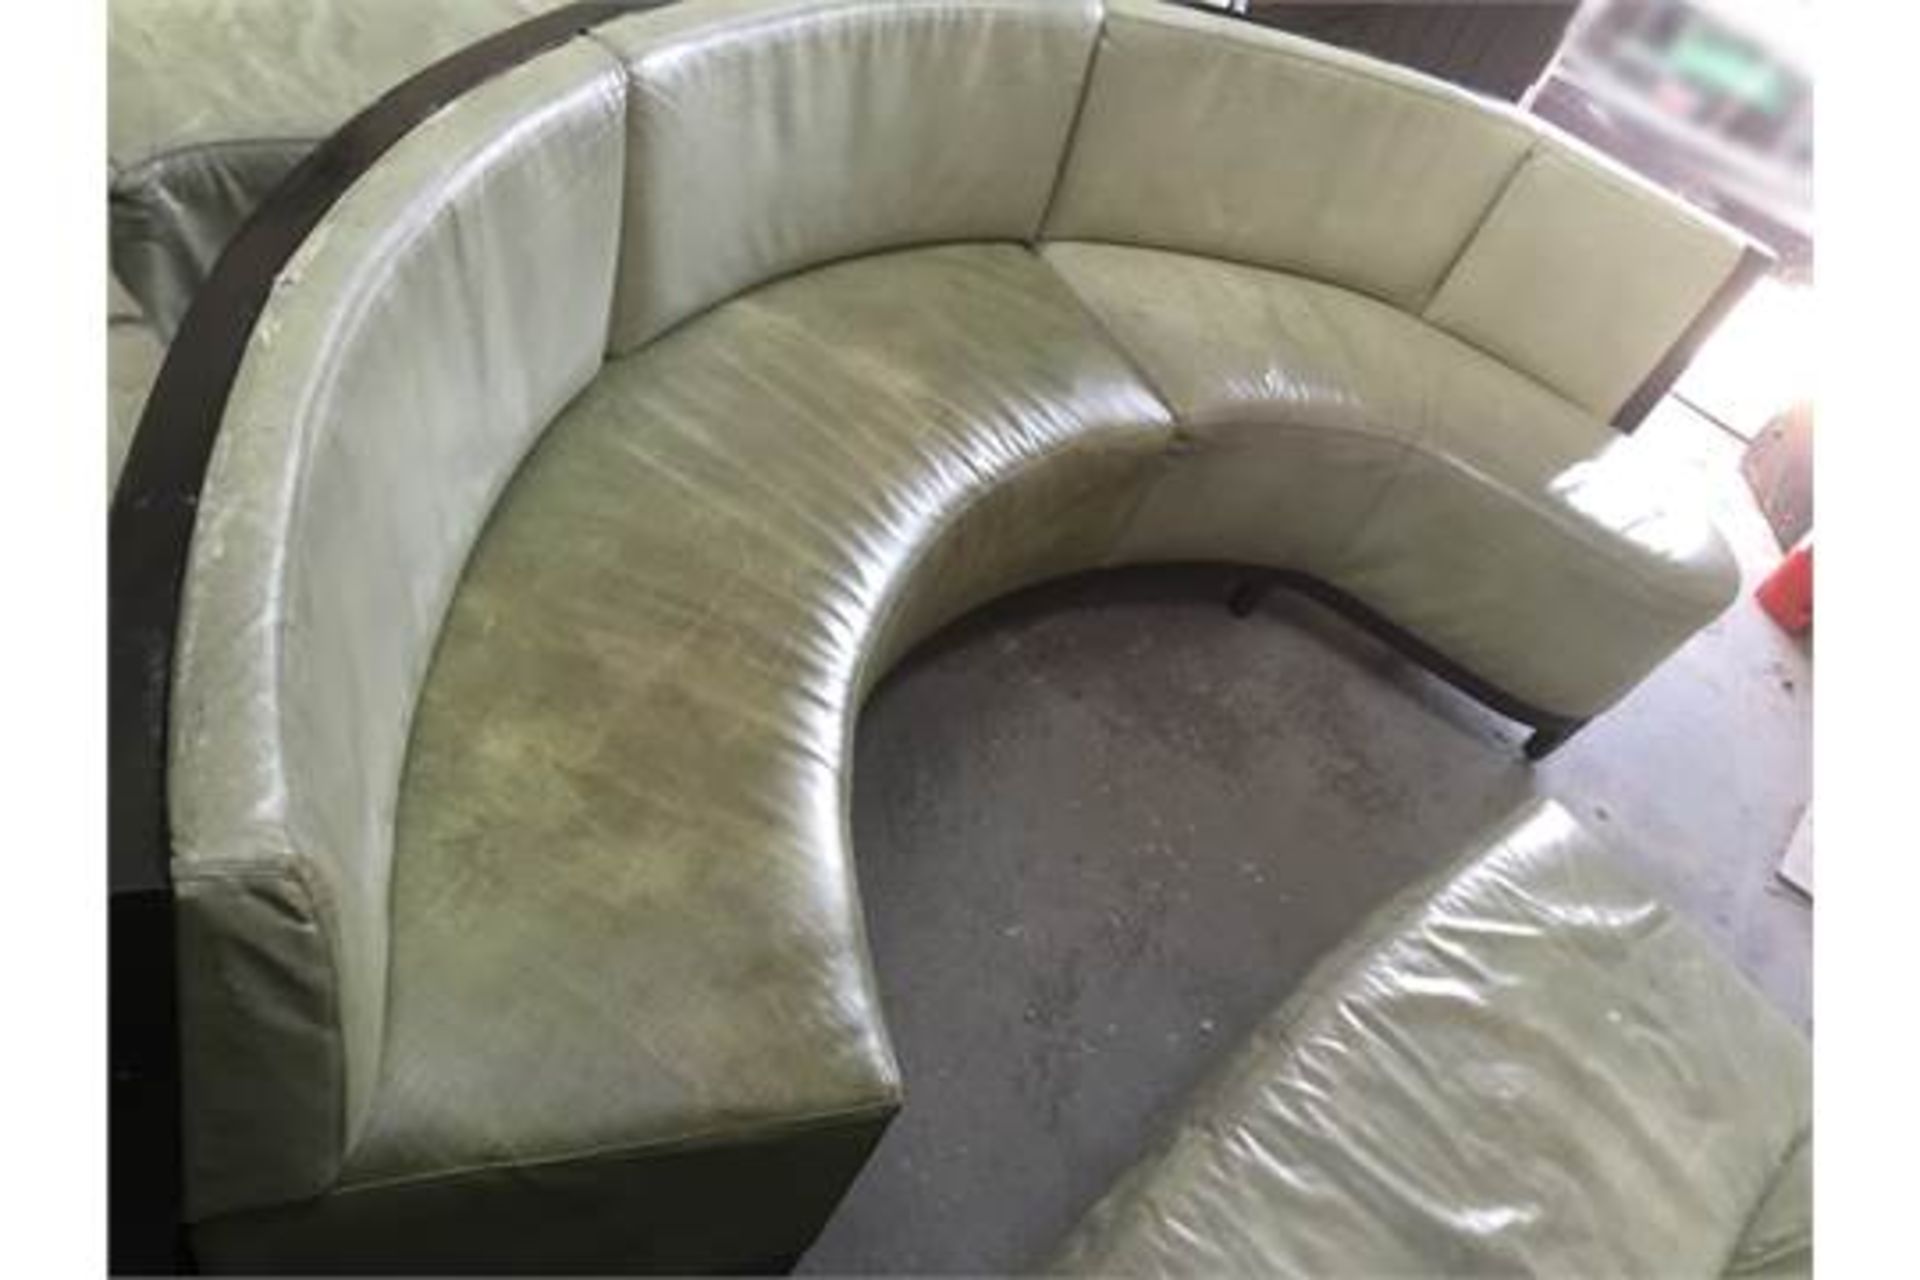 1 x Luxury Upholstered Curved Seating Area - Recently Removed From Nobu - Dimensions: W285 x D62cm x - Image 4 of 7